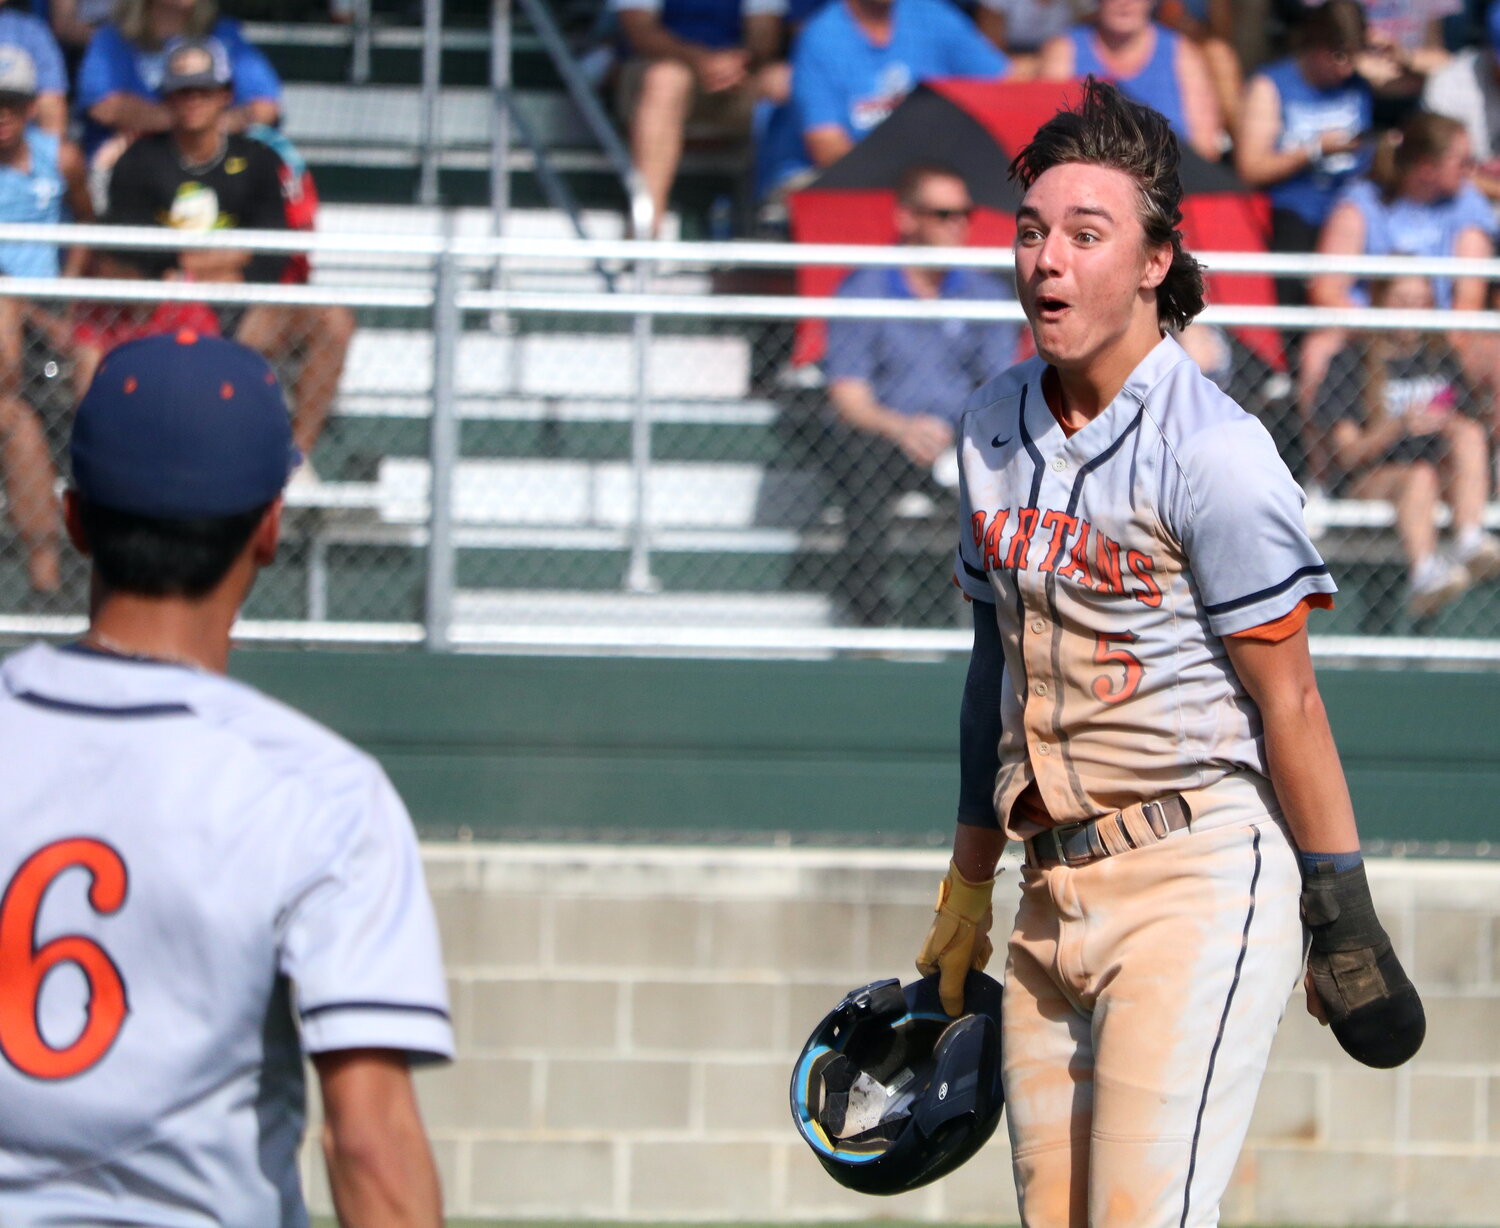 Jake Steffes celebrates after scoring a run during Monday's District 19-6A play-in game between Seven Lakes and Taylor at the Mayde Creek baseball field.